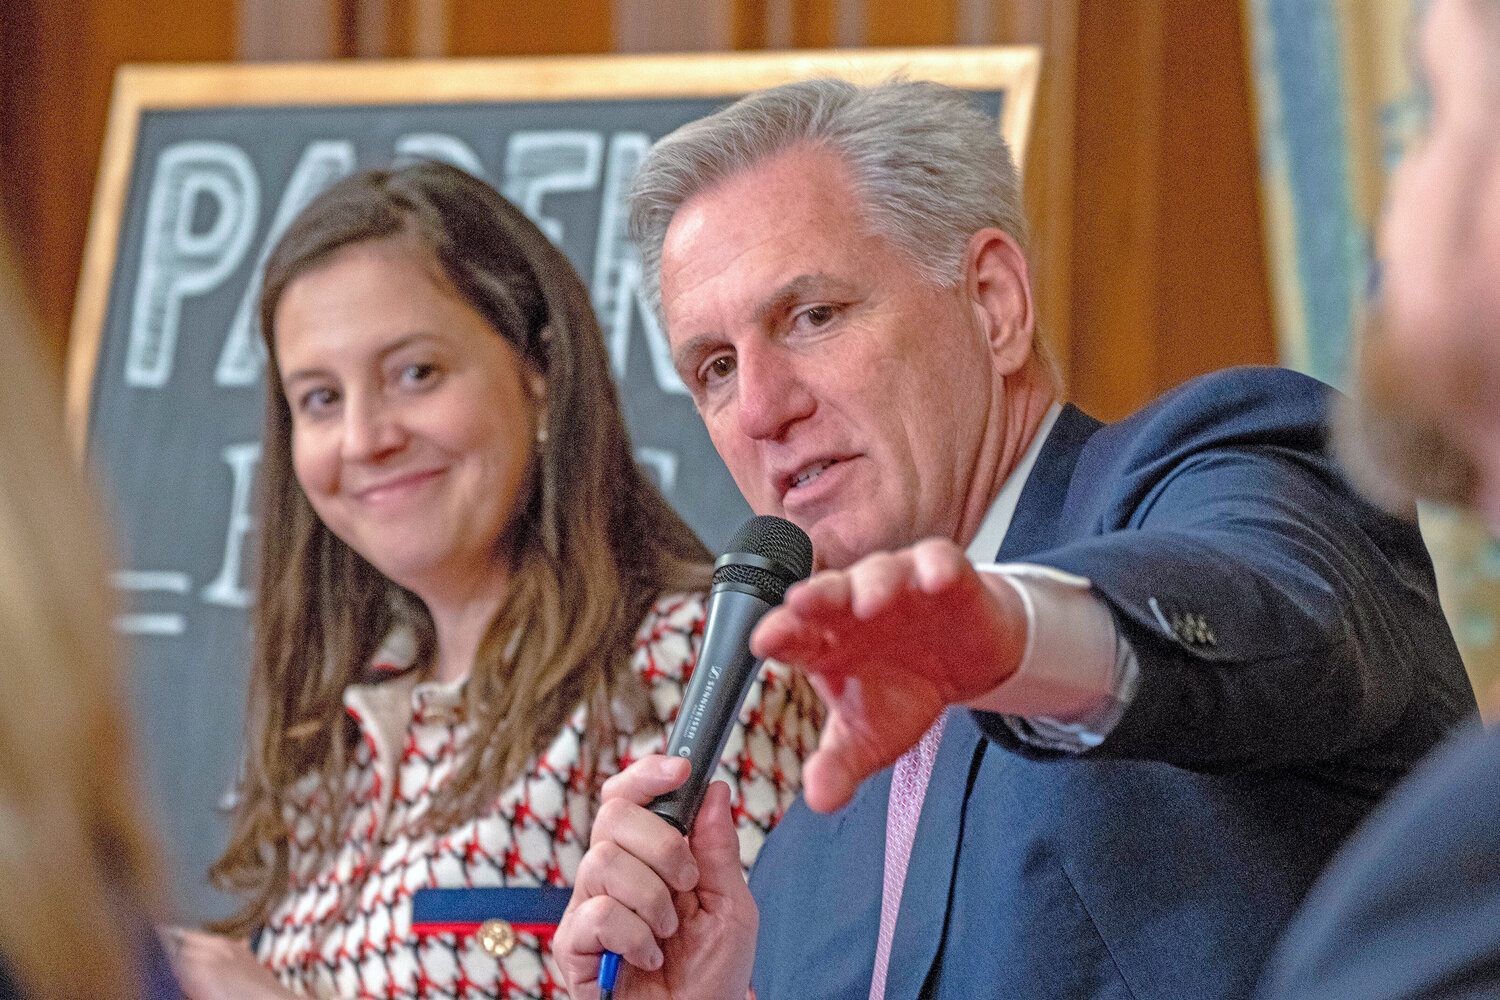 Speaker of the House Kevin McCarthy, of Calif., right, speaks about the proposed legislation dubbed the “Parents Bill of Rights,” Wednesday, March 1, next to Rep. Elise Stefanik, R-N.Y., on Capitol Hill in Washington.